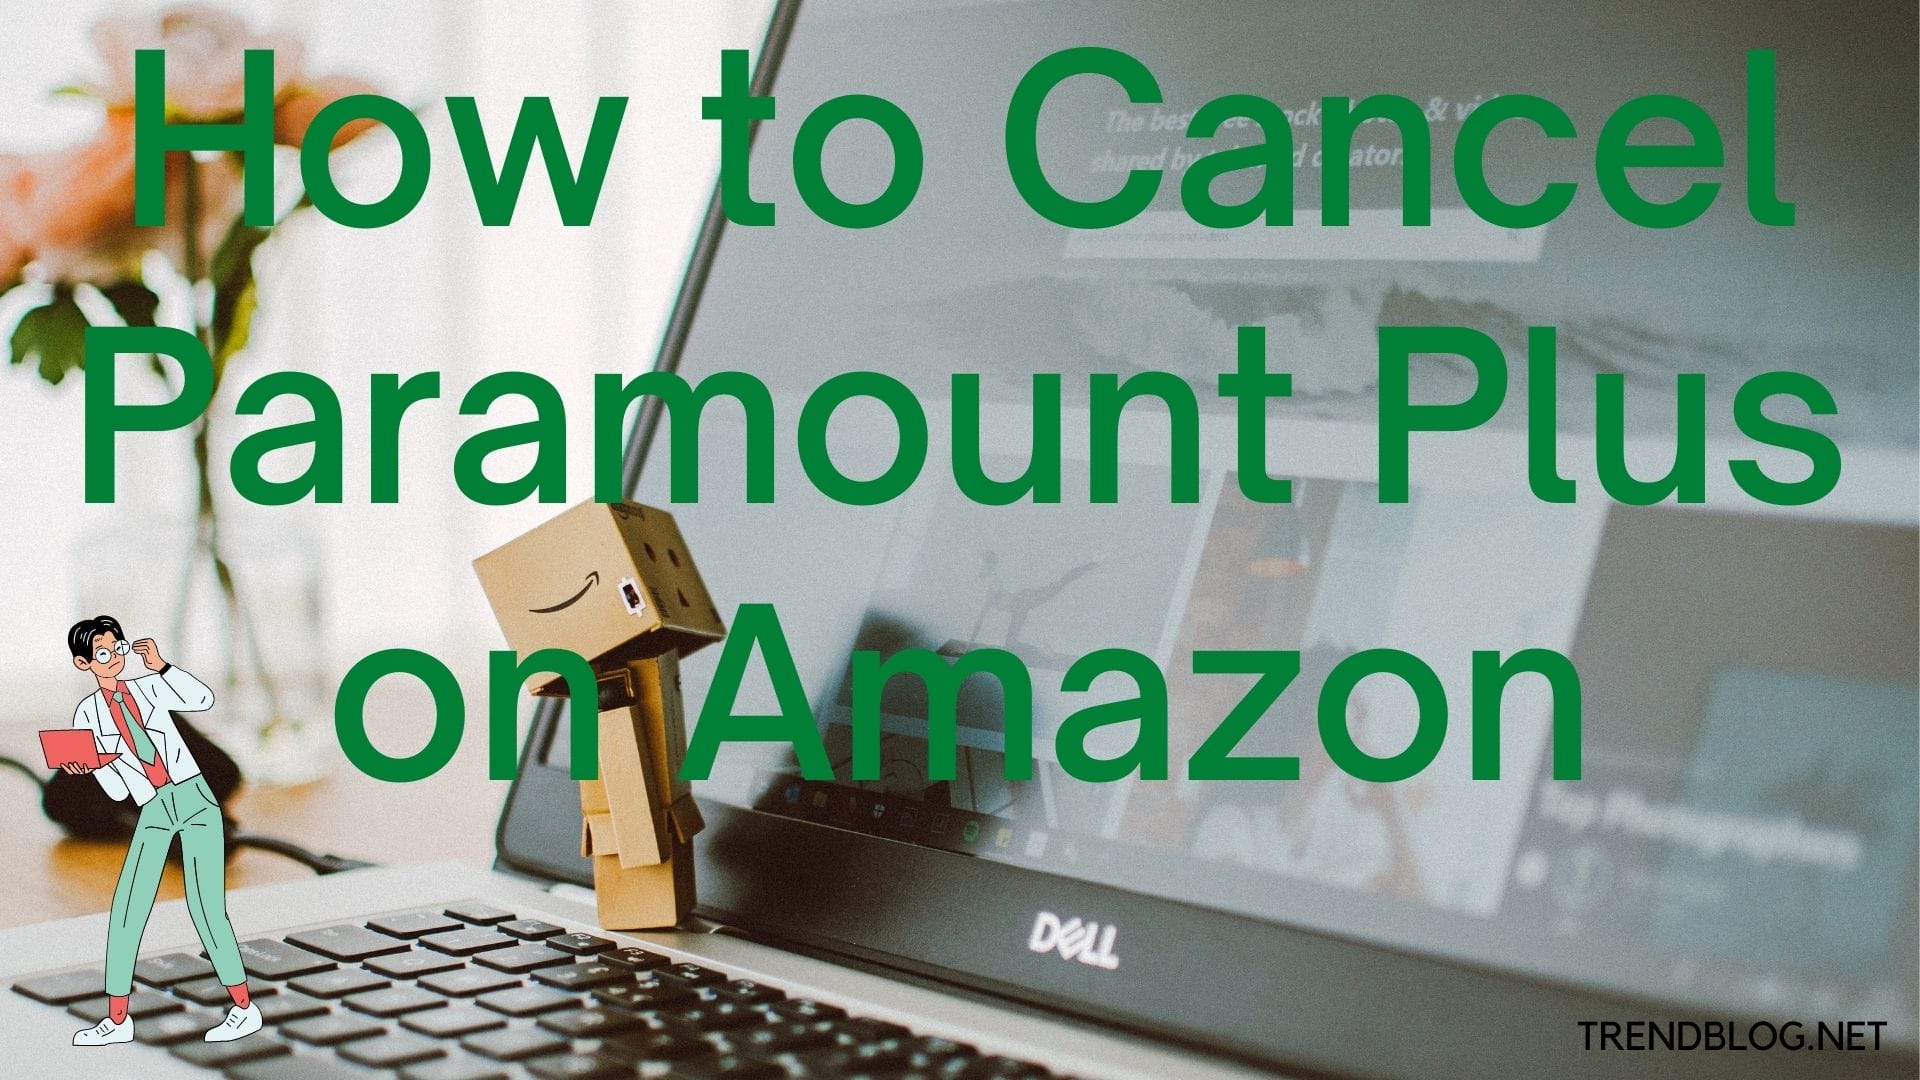  How to cancel Paramount Plus on Amazon in 2022